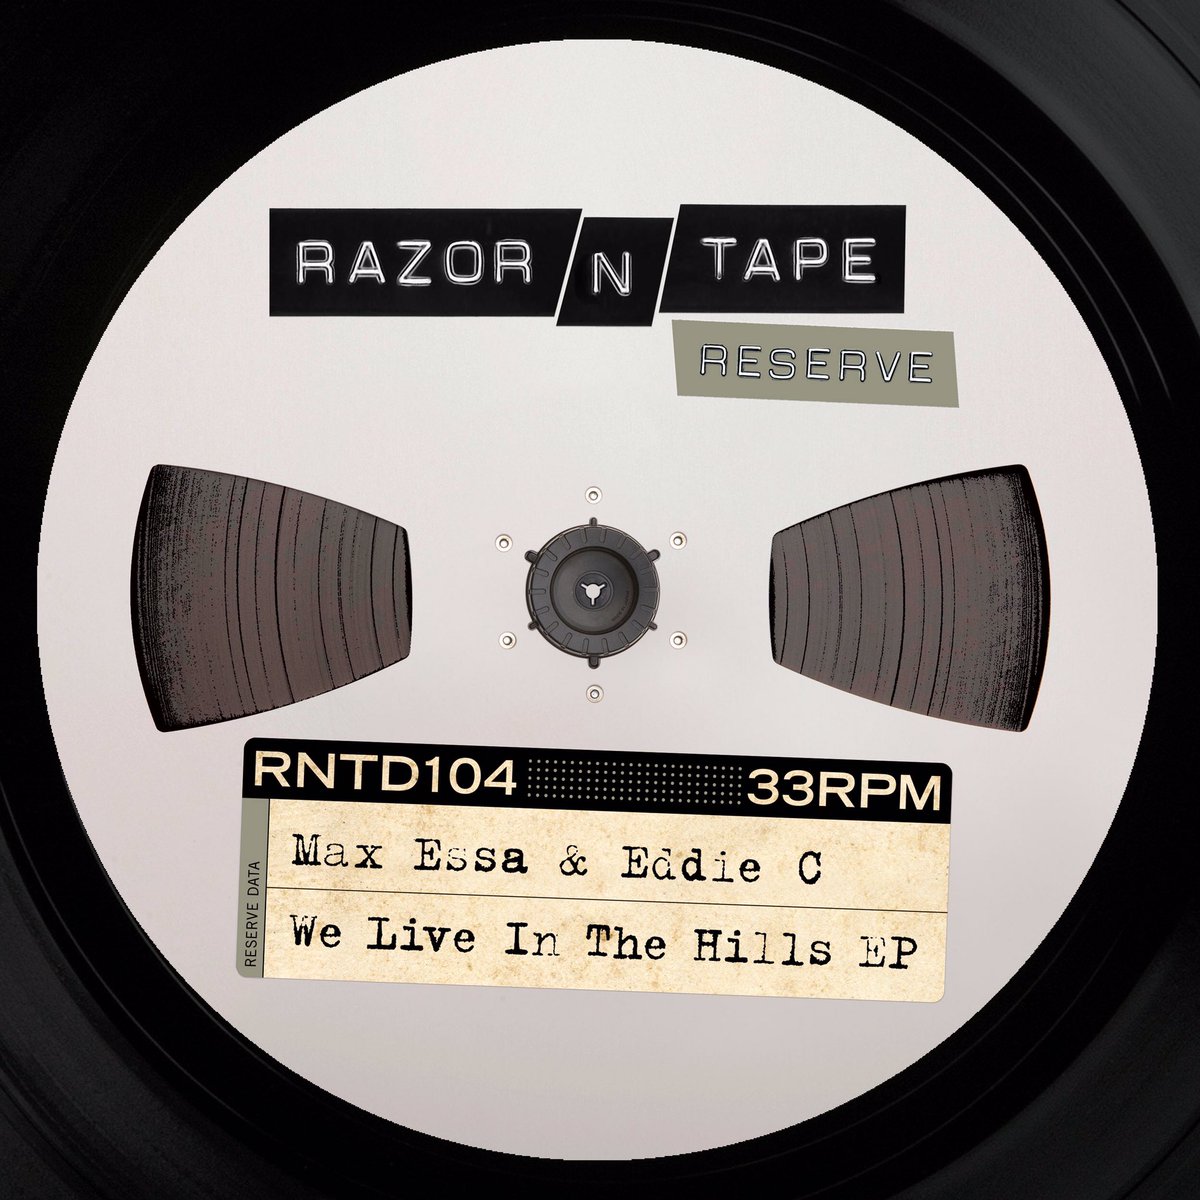 The ‘We Live In The Hills’ EP will be available in all good record stores this week (it’s already in at Juno Records) and available from Friday 8th March from the Razor N Tape Bandcamp (link in bio)!